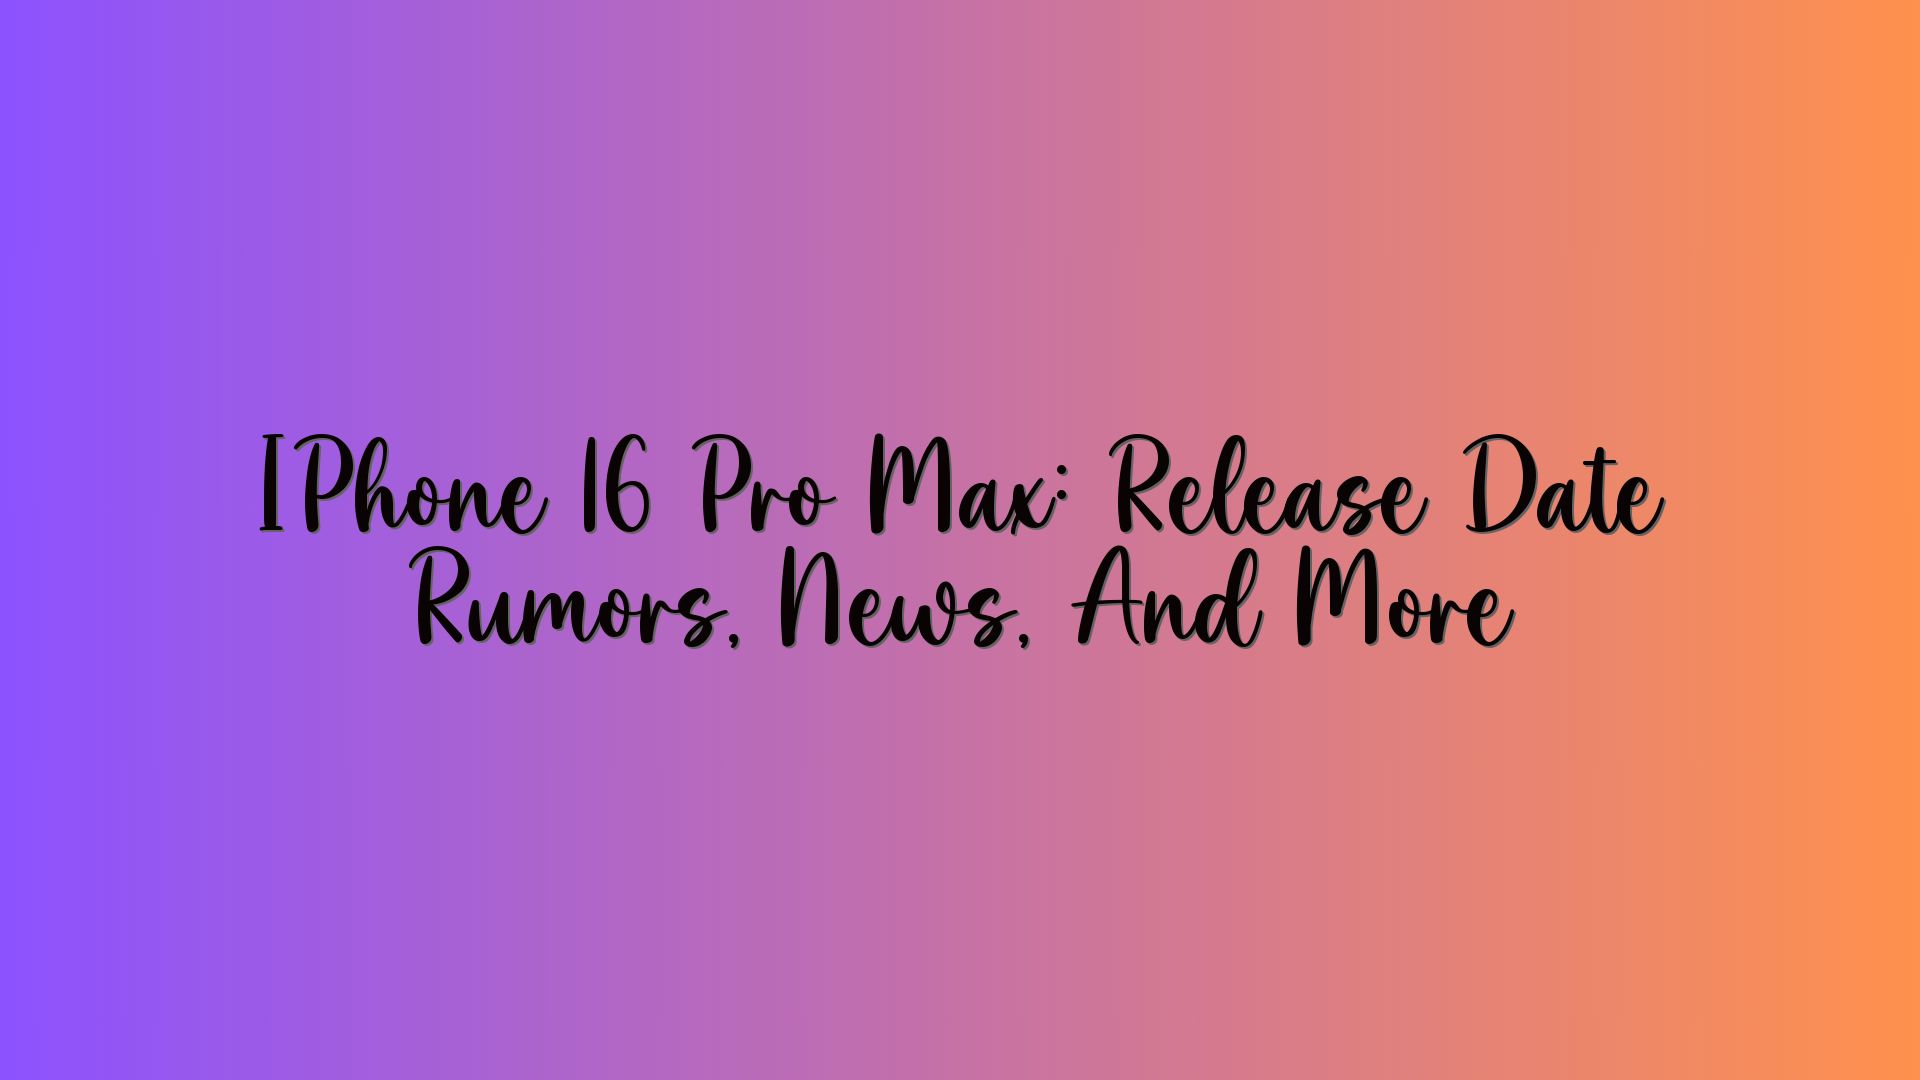 IPhone 16 Pro Max: Release Date Rumors, News, And More